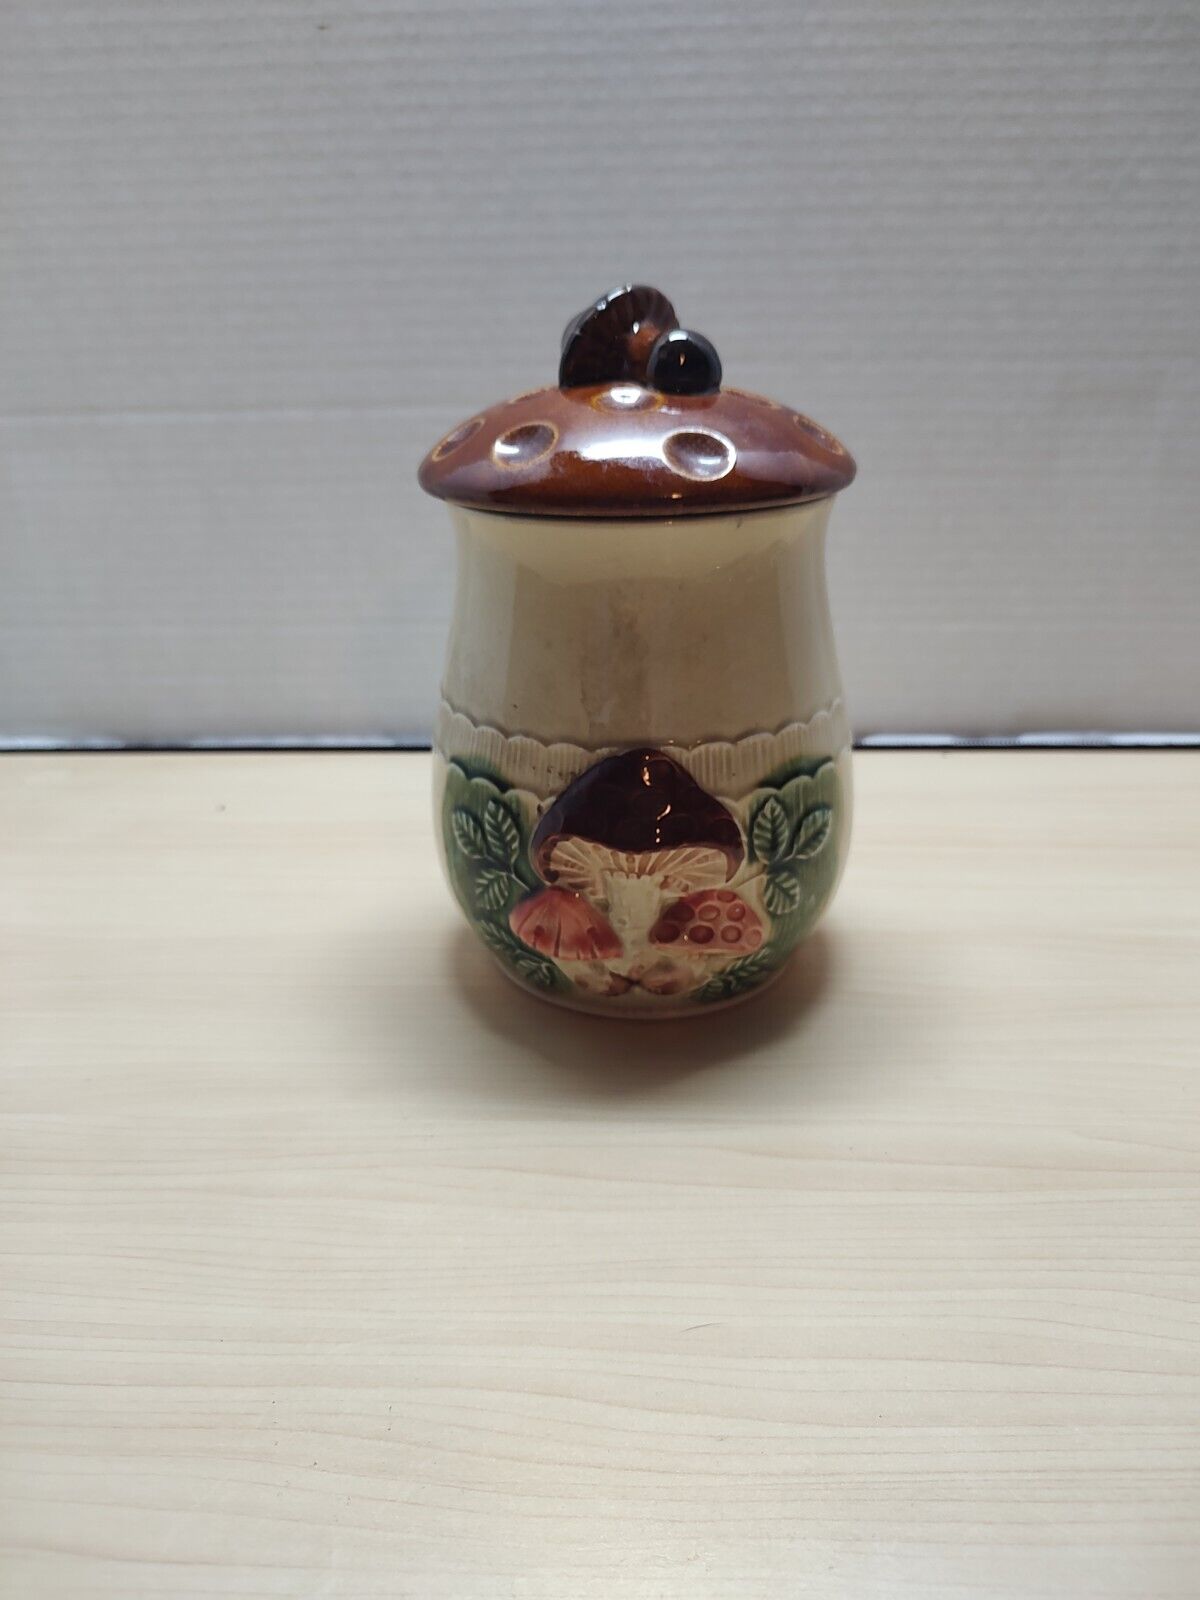 Vintage Ceramic Small Hand Painted Mushroom Container by Empress Haruta Japan